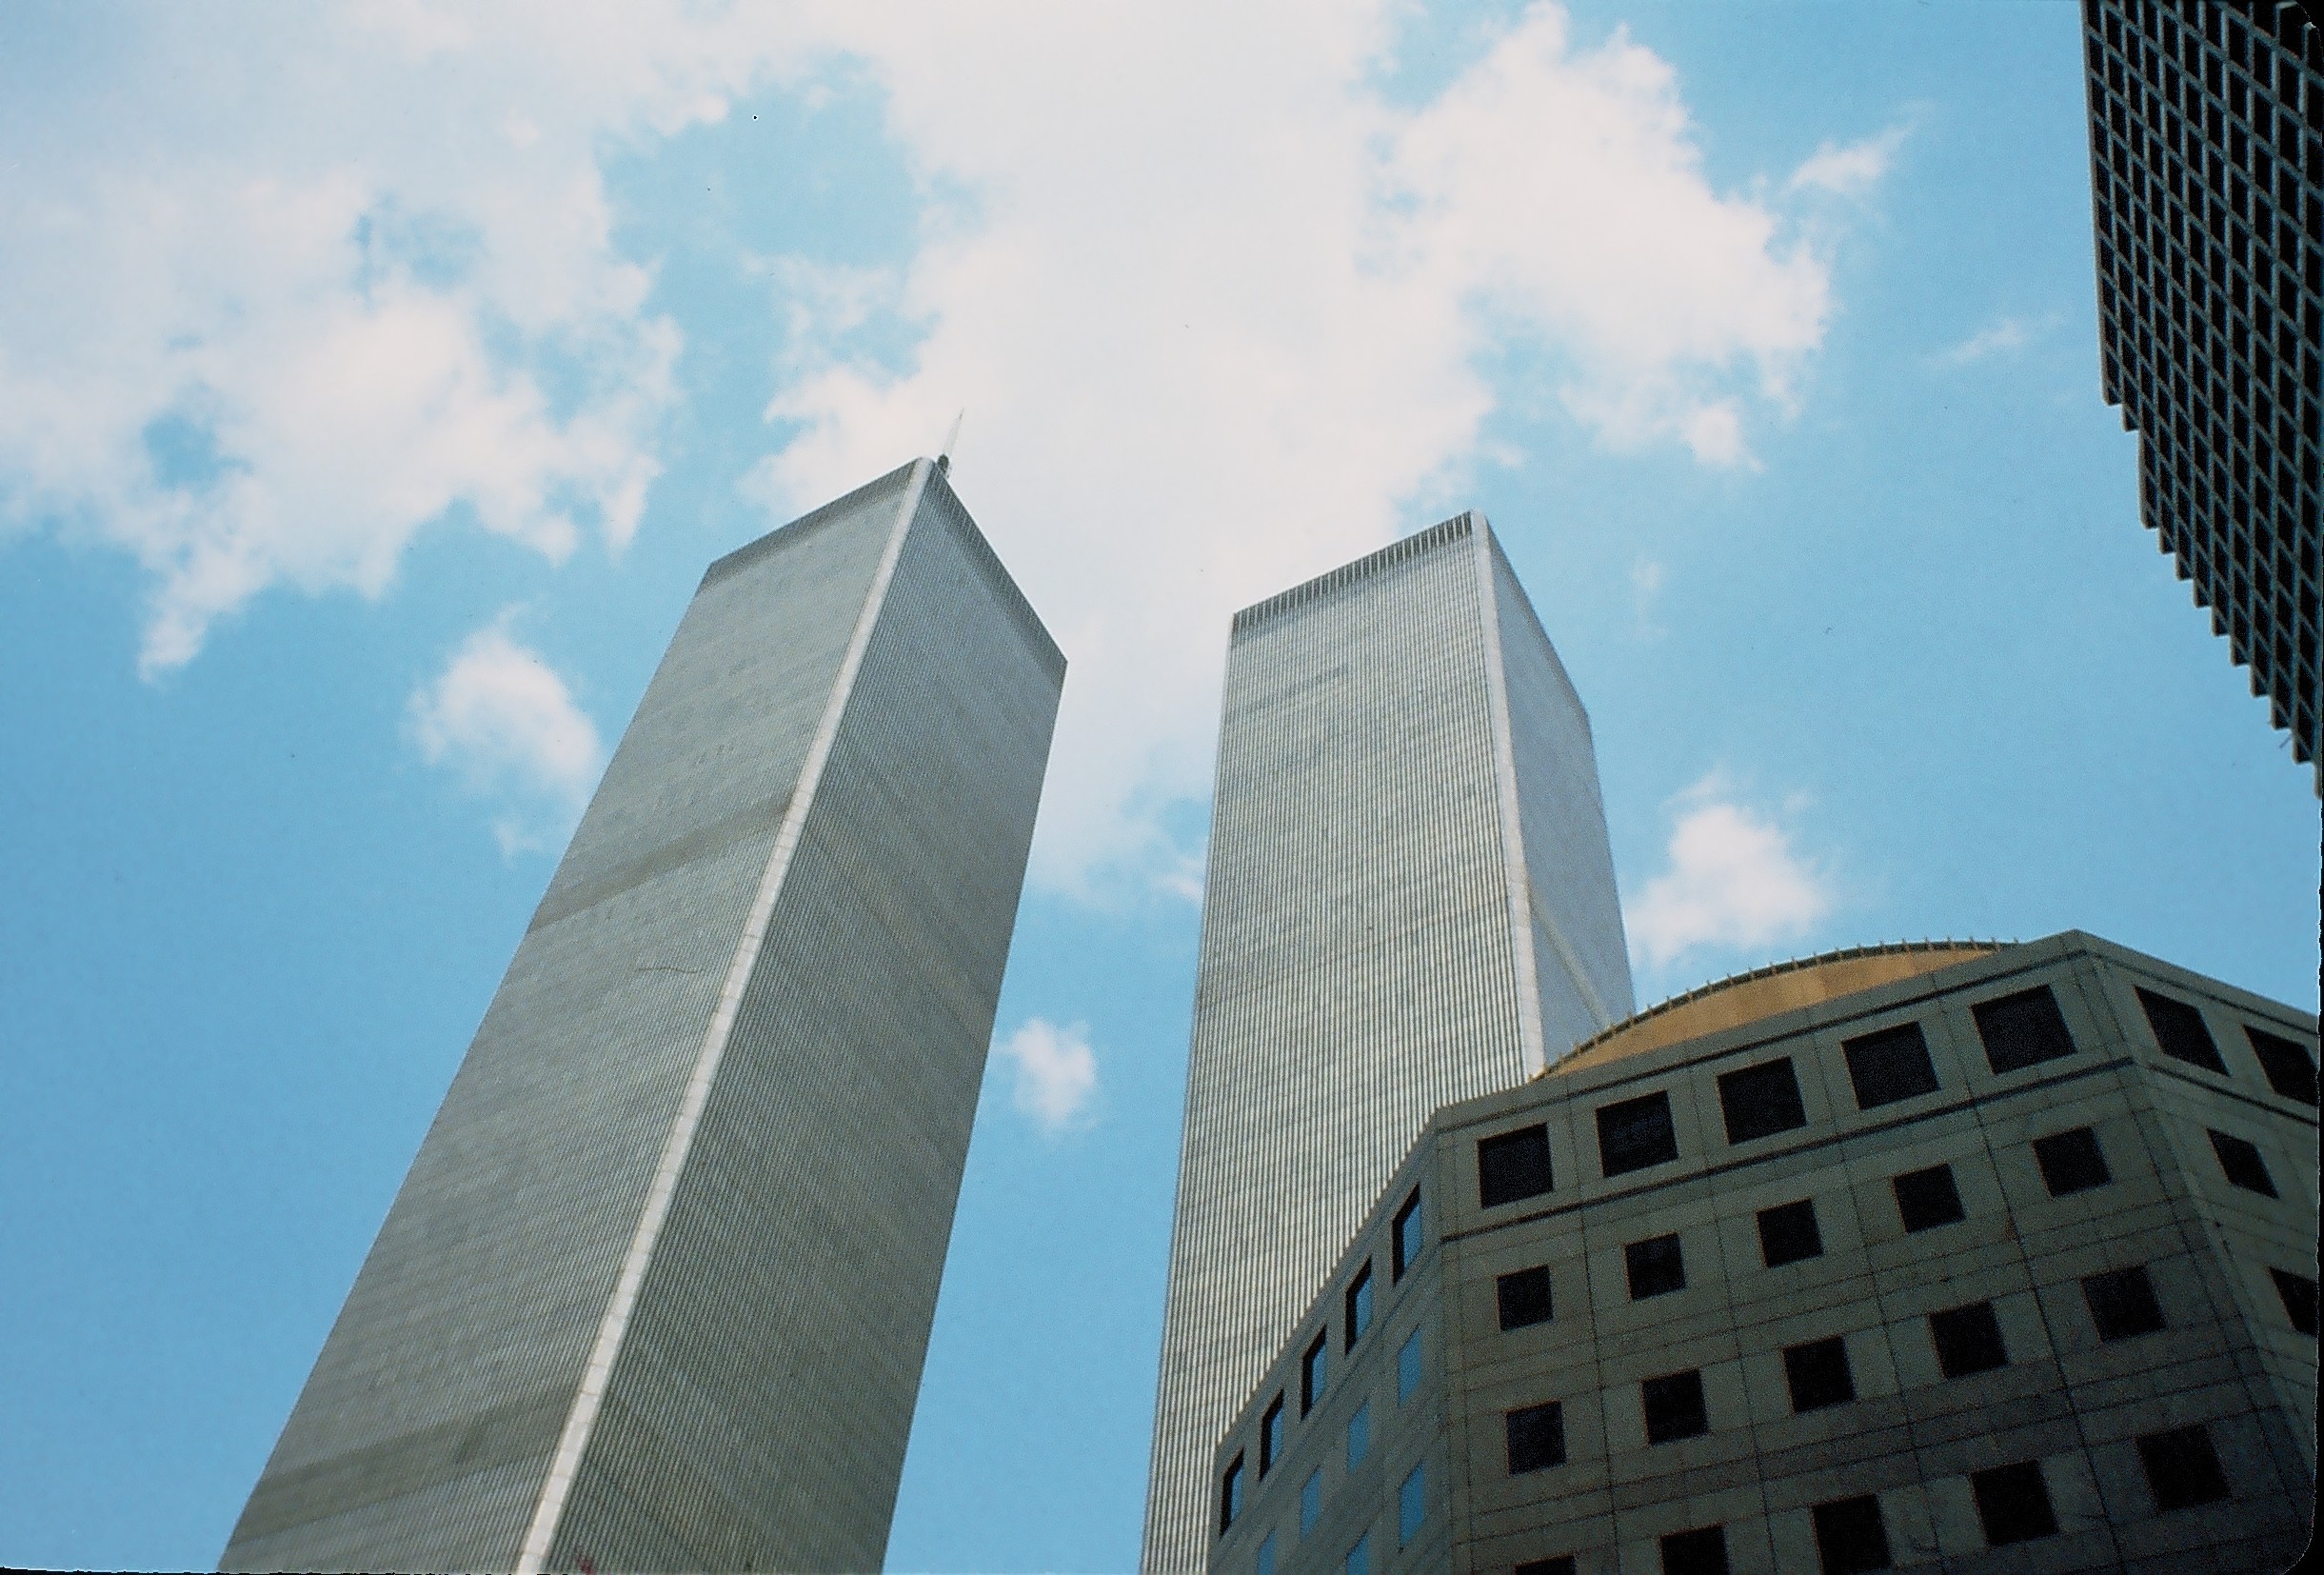 2441x1654 File:World Trade Centre Twin Towers New York.jpg